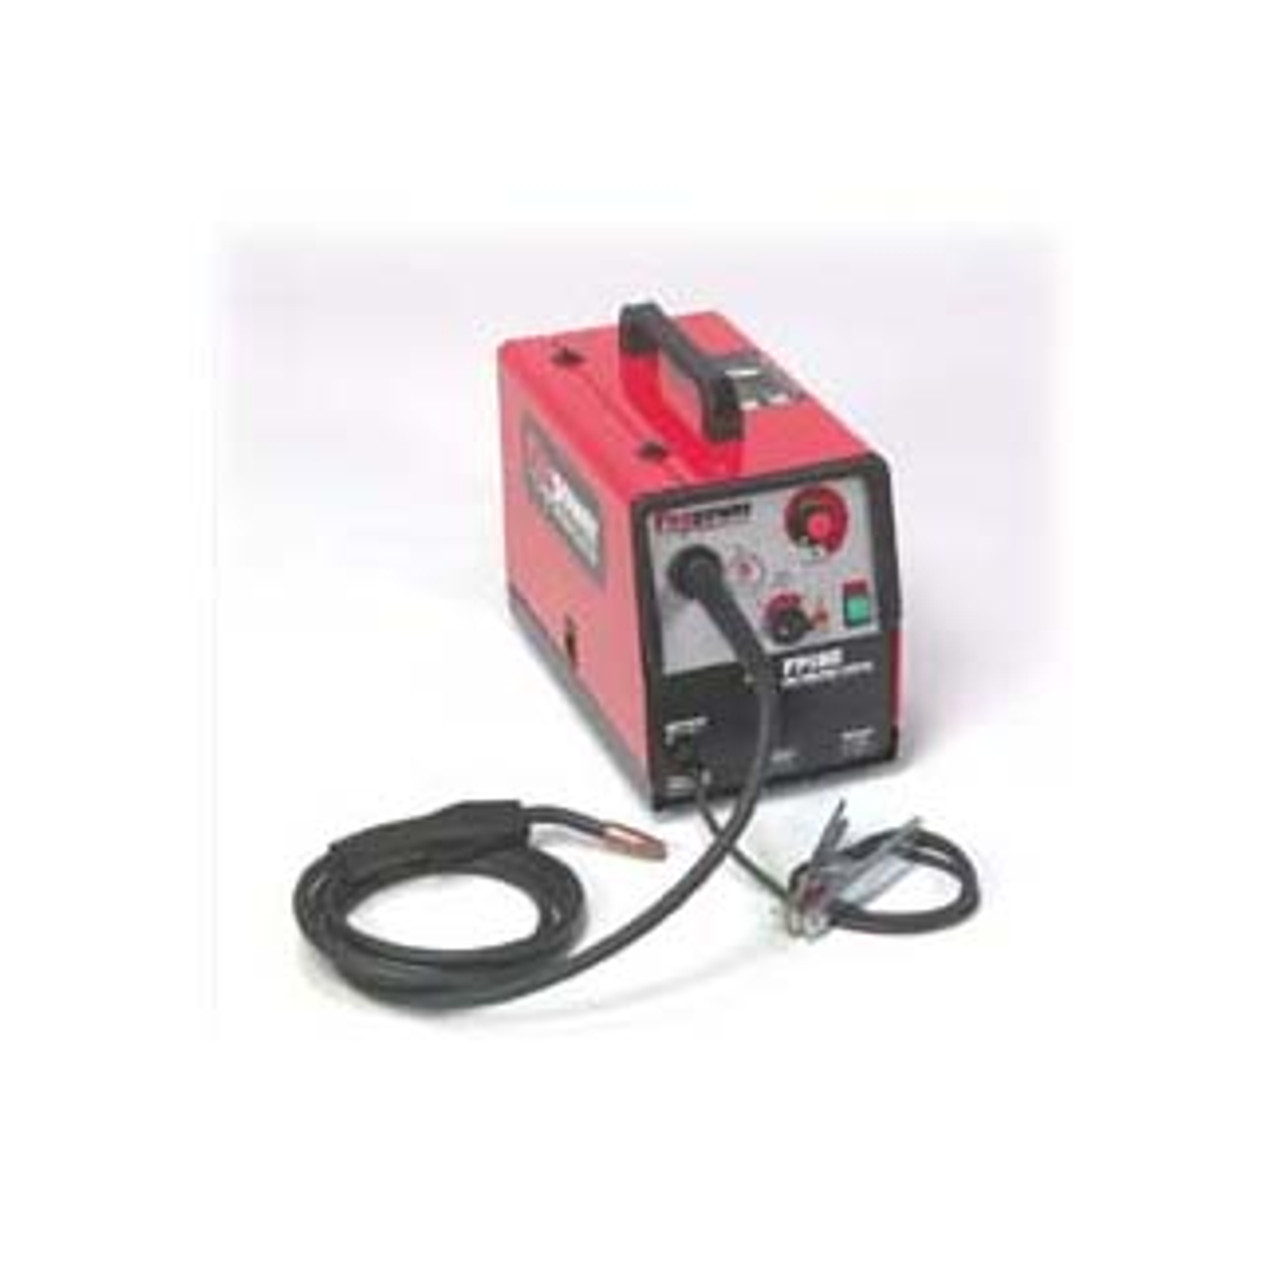 FP-120, FP-130 and FP-160 MIG welding system